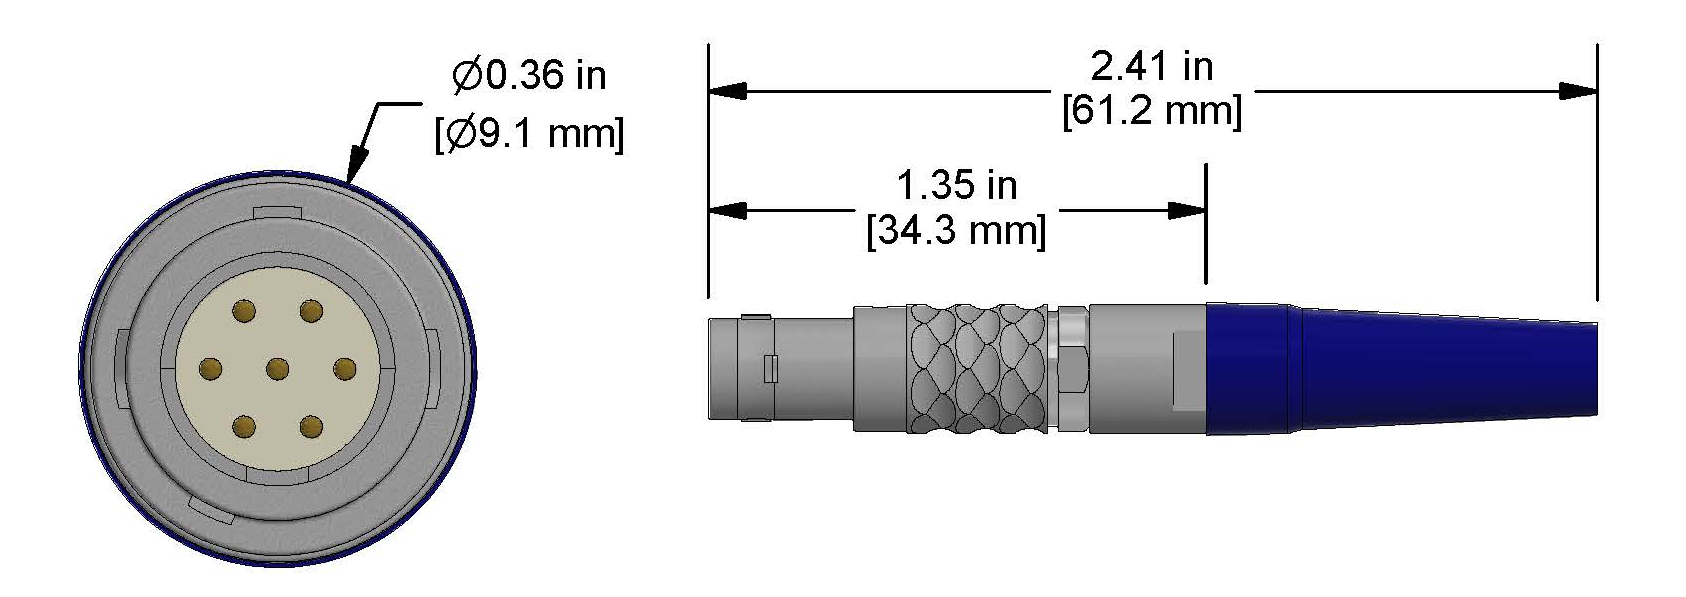 A line drawing showing the diameter and length of an assembled CTC C617 vibration sensor connector kit.